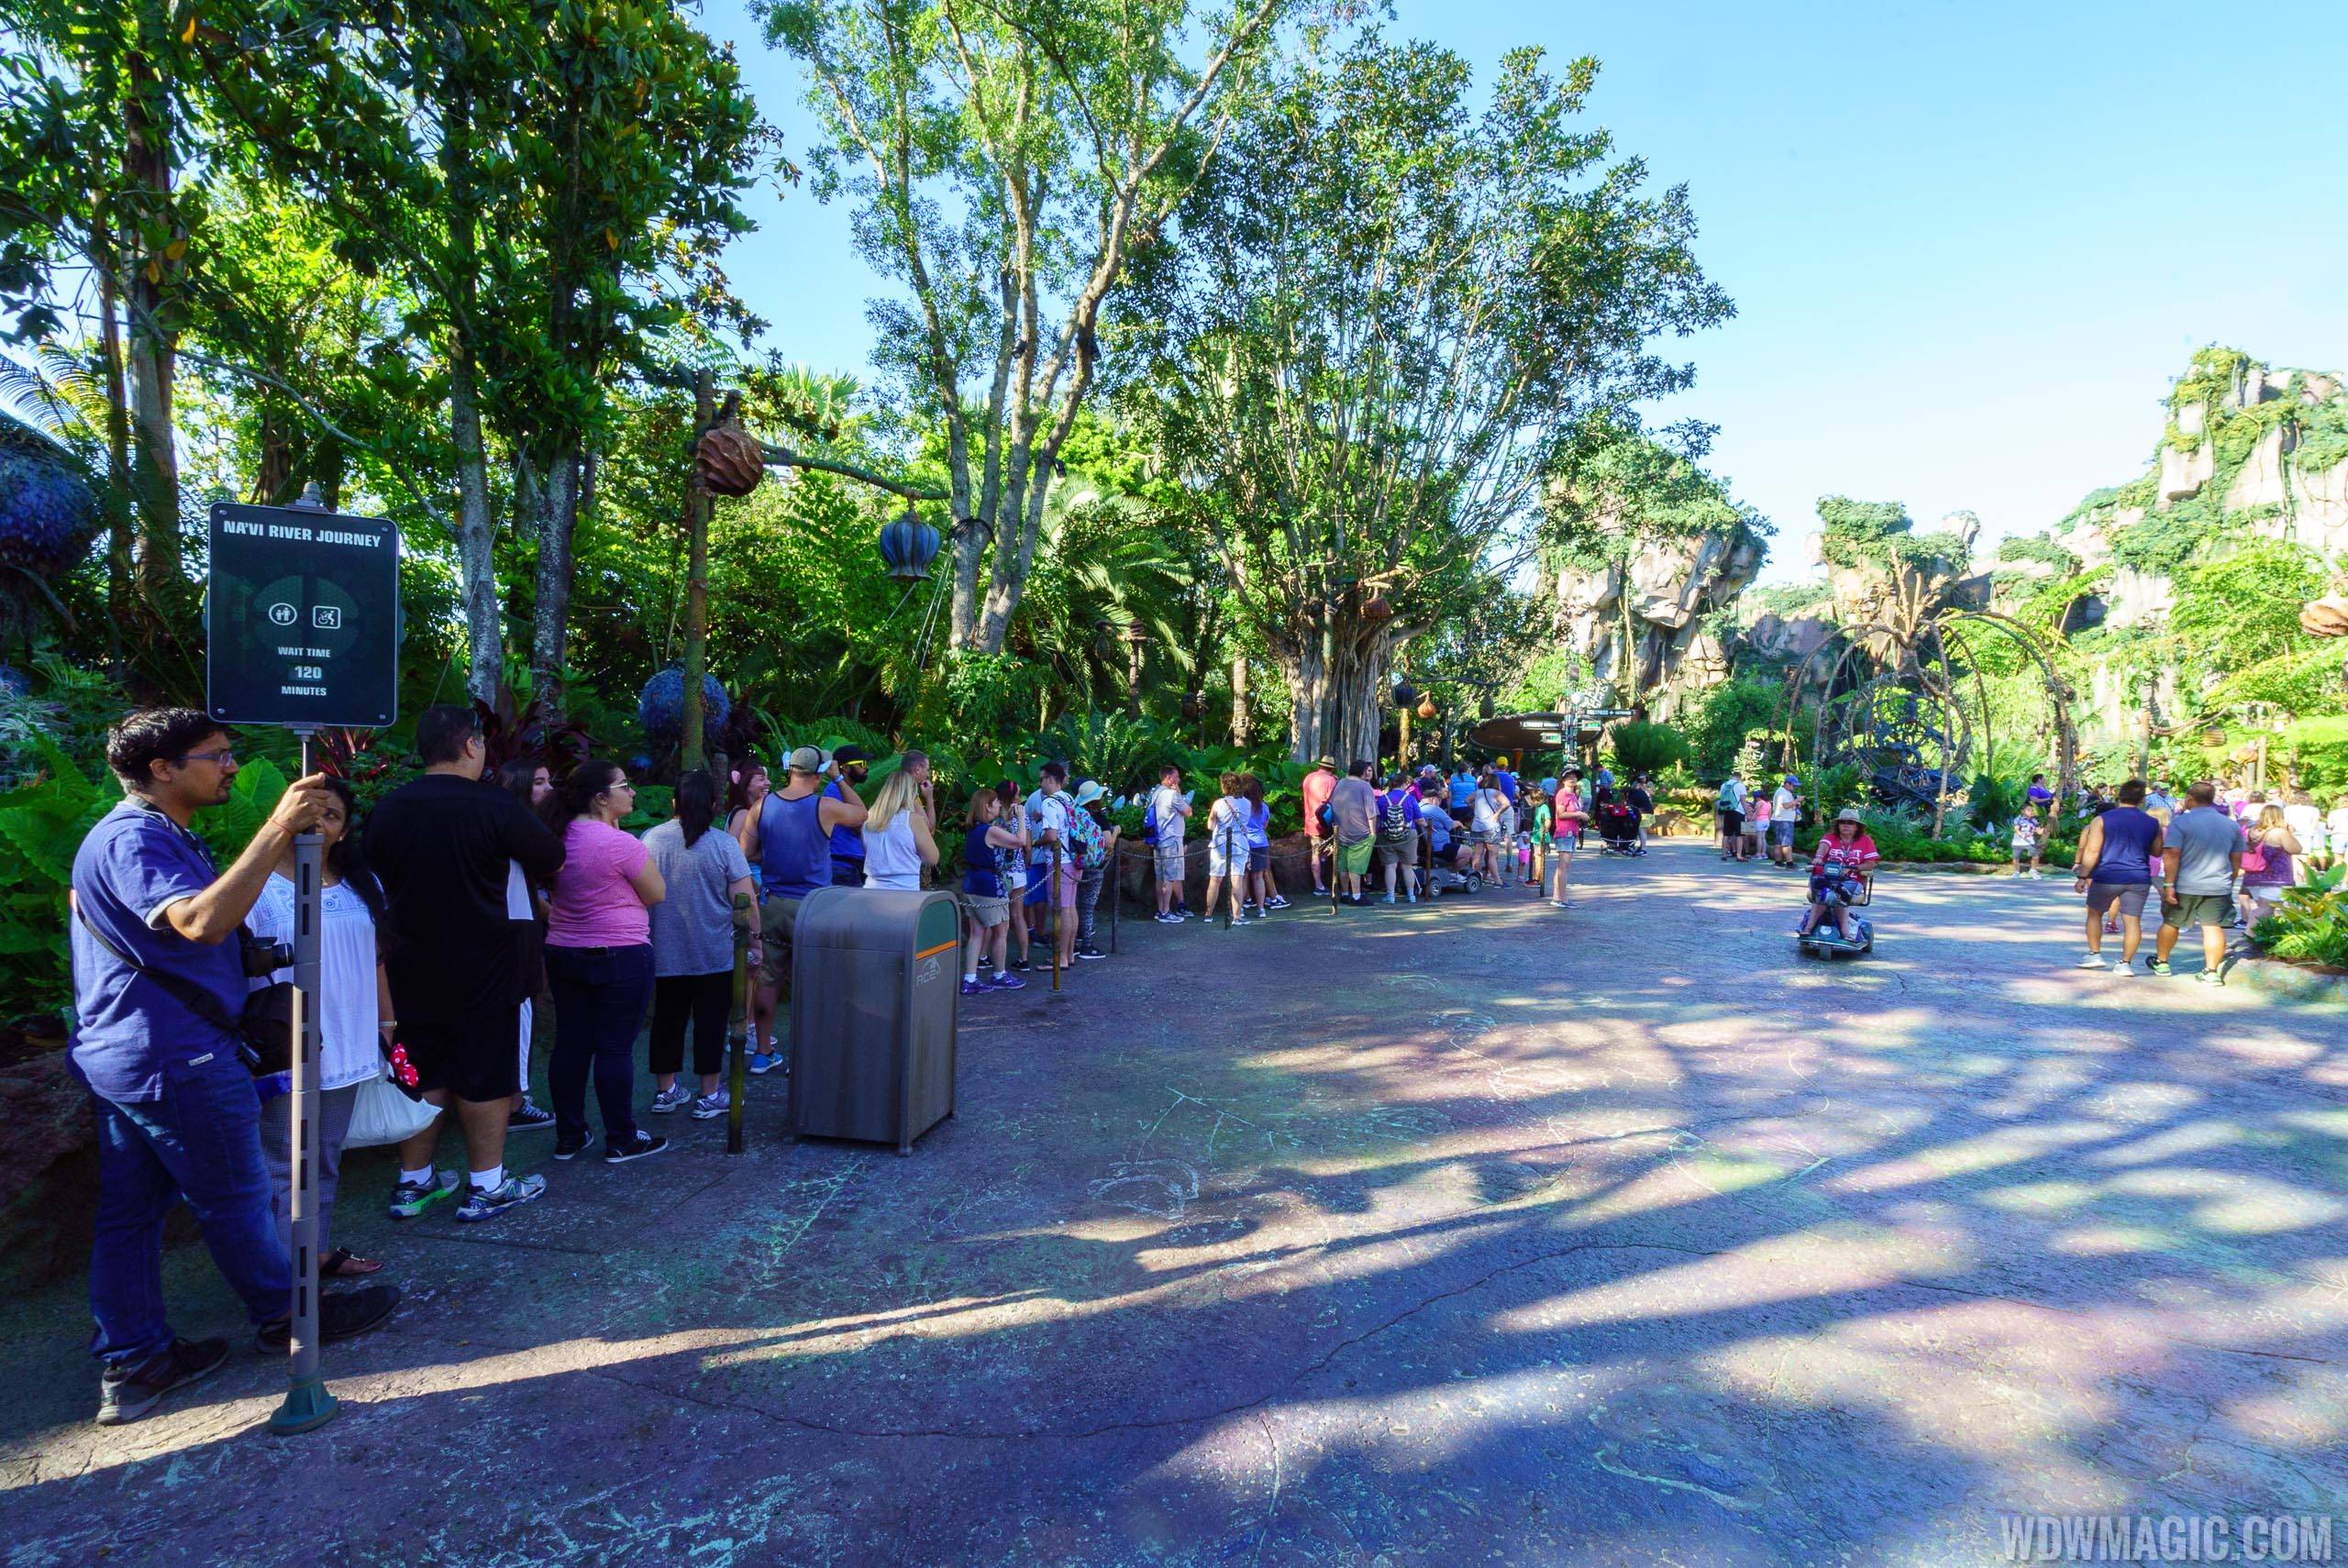 Guests in line for Na'vi River Journey